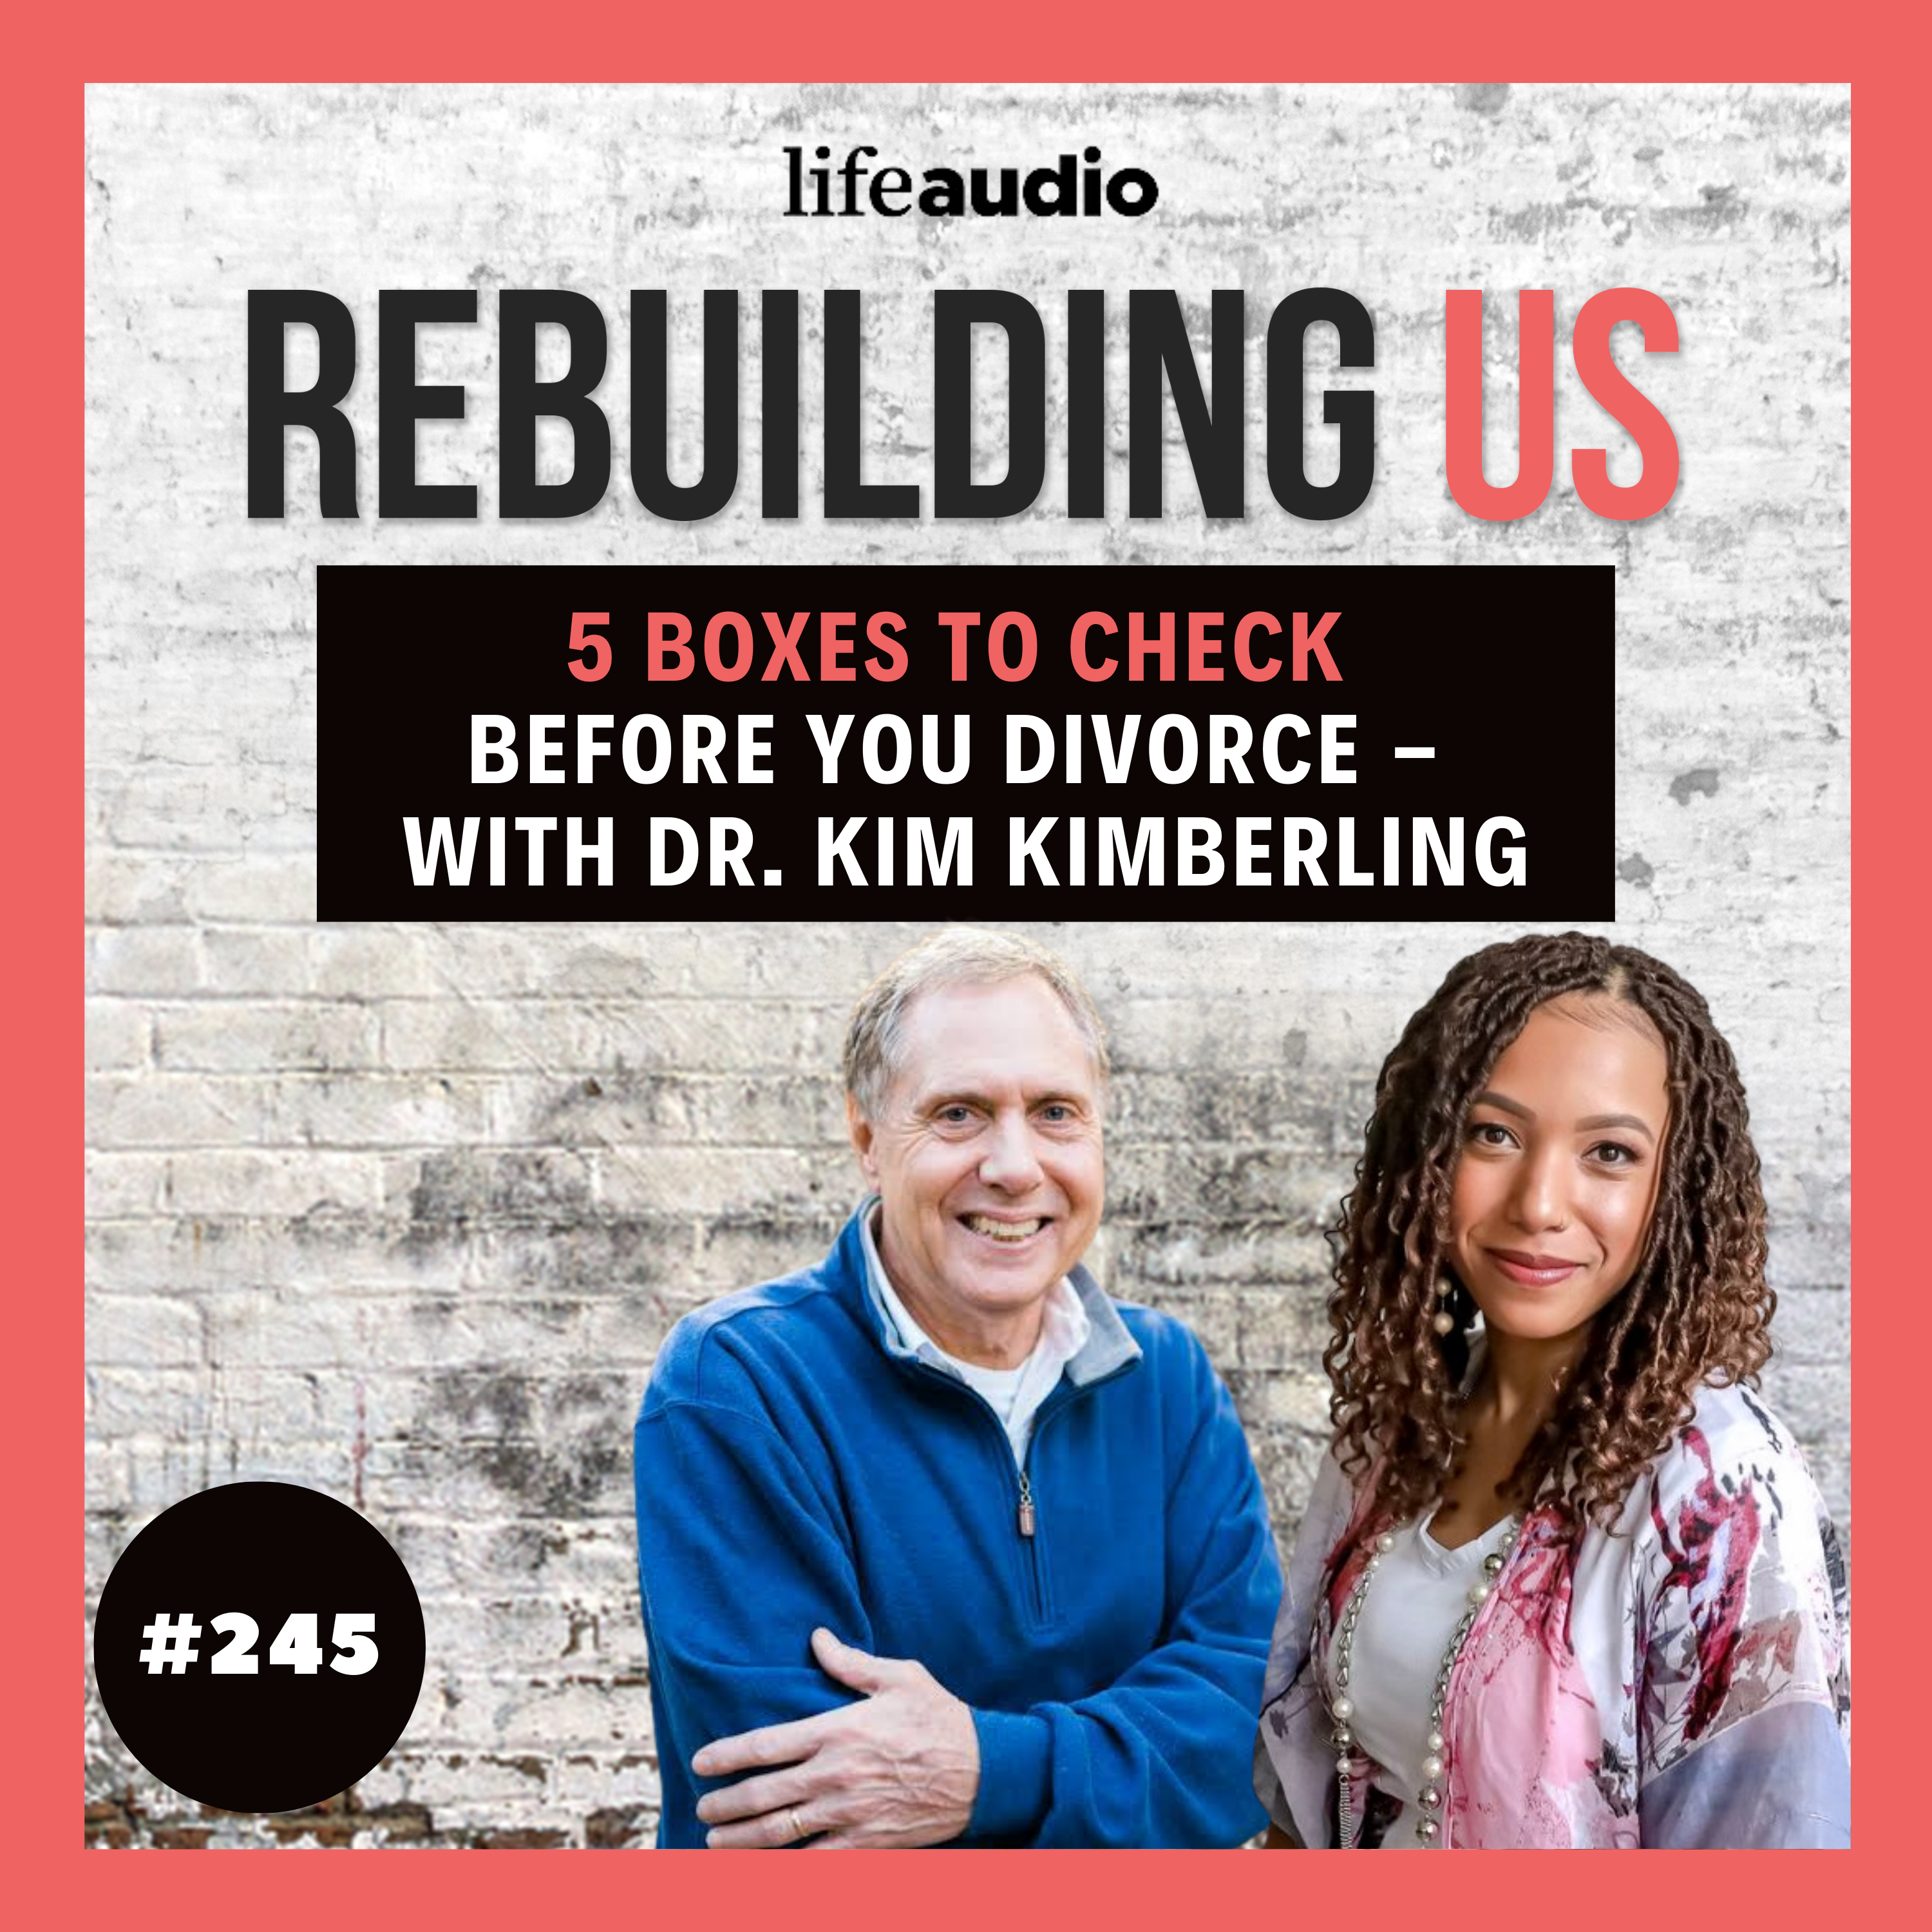 5 Boxes to Check Before You Divorce - with Dr. Kim Kimberling